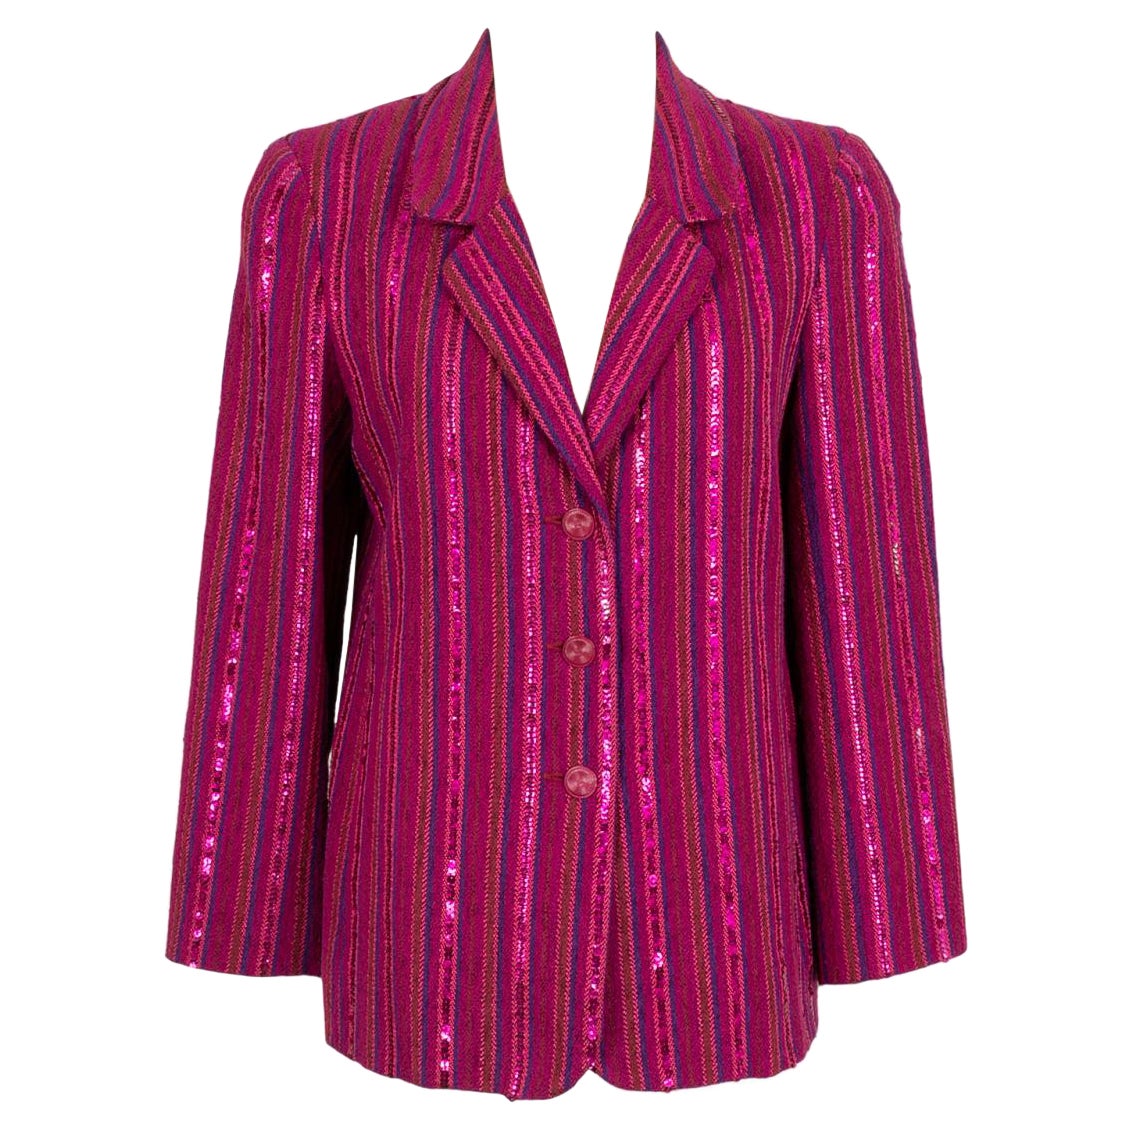 Chanel Purple Cotton Jacket Sewn with Sequins